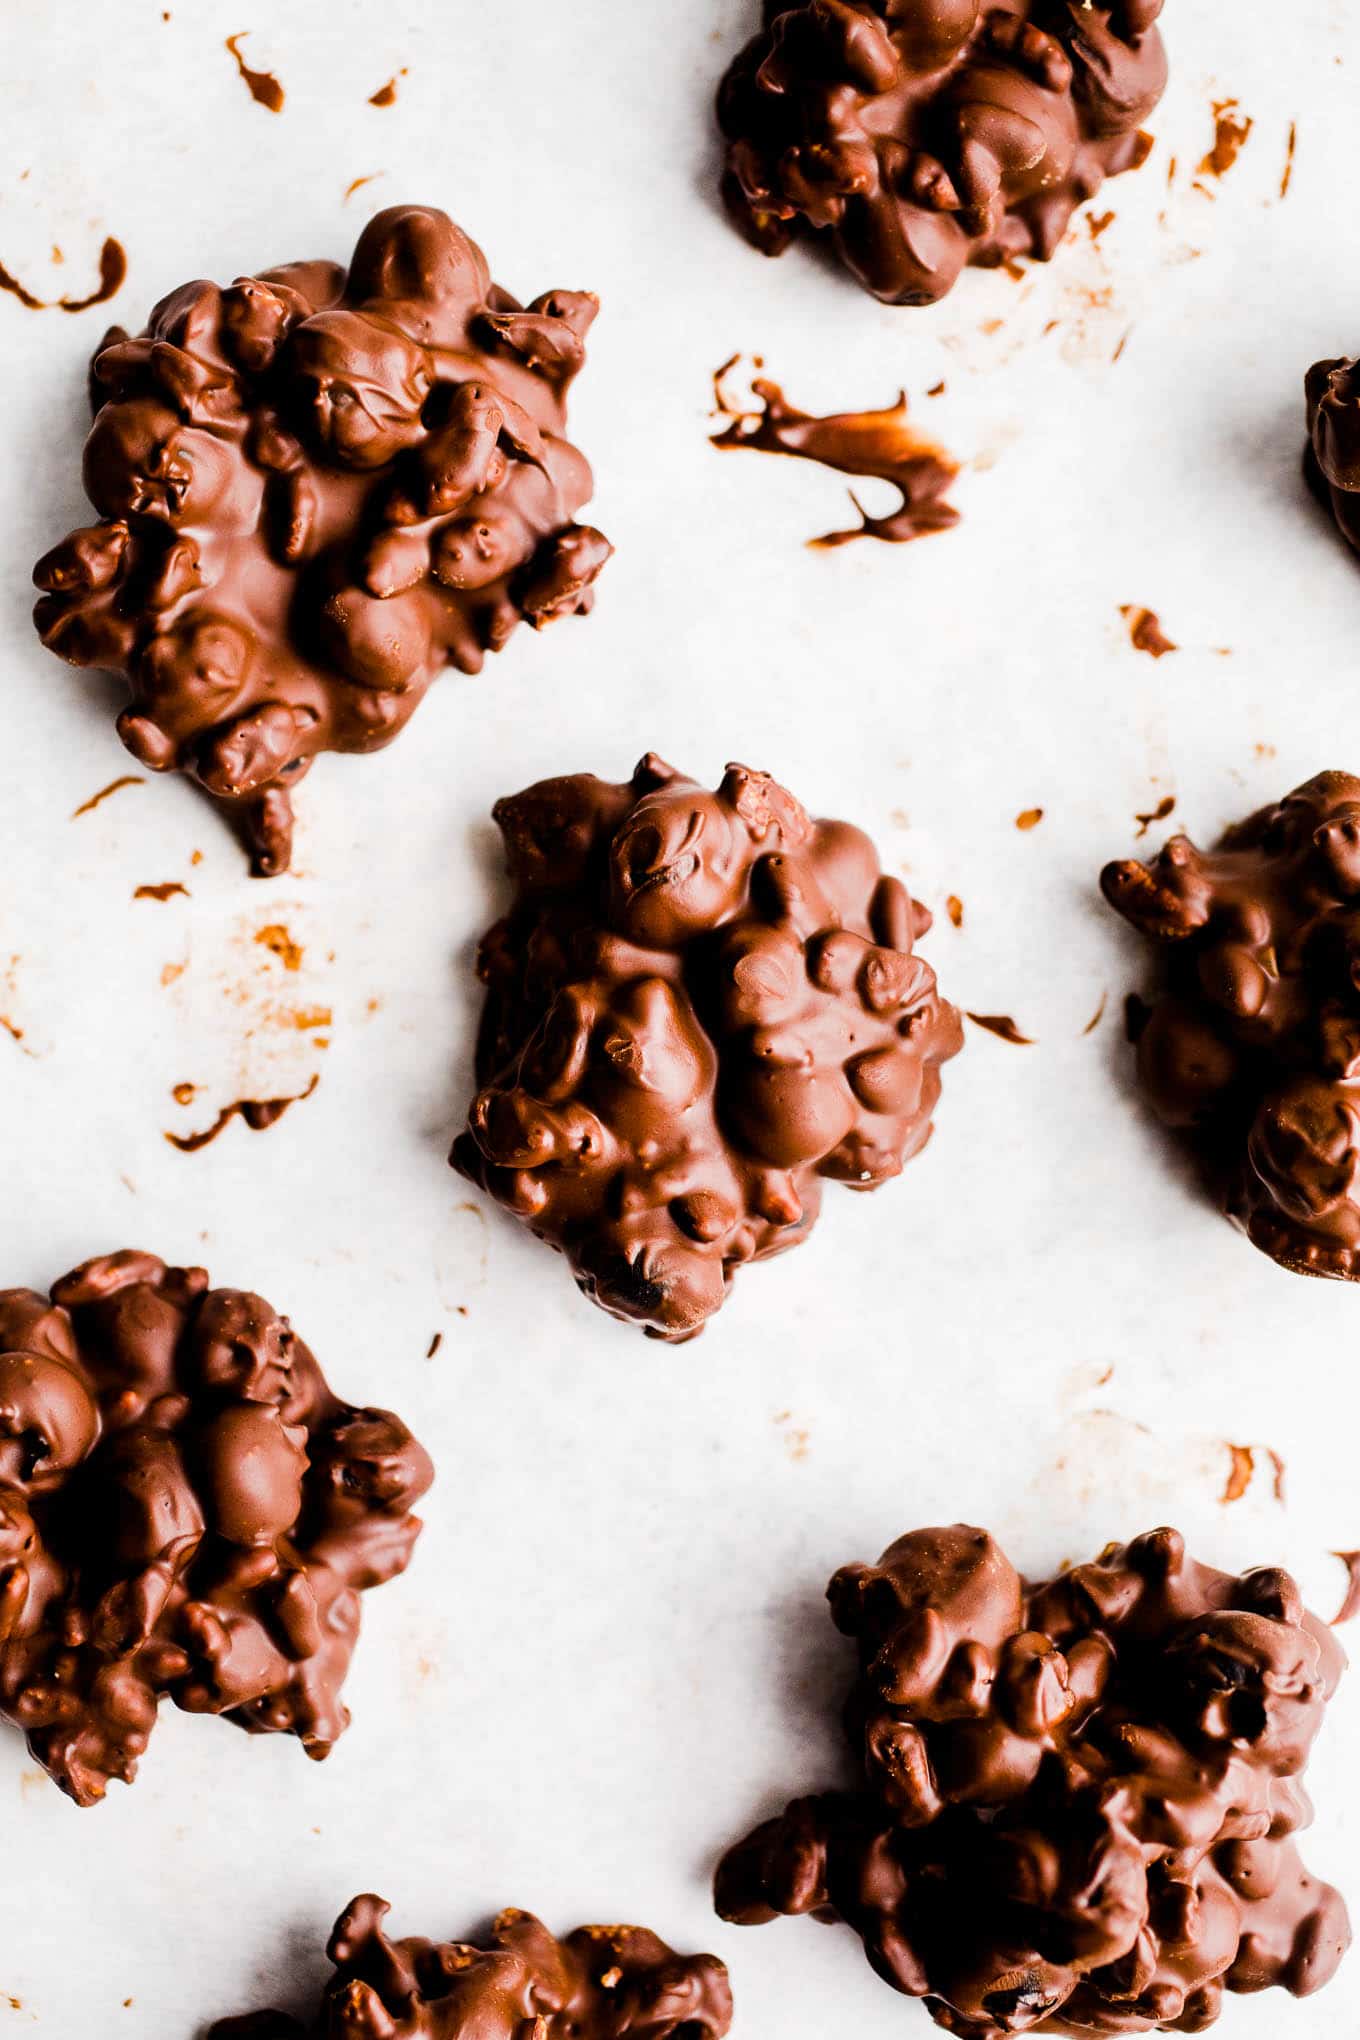 Chocolate clusters on a piece of parchment paper.